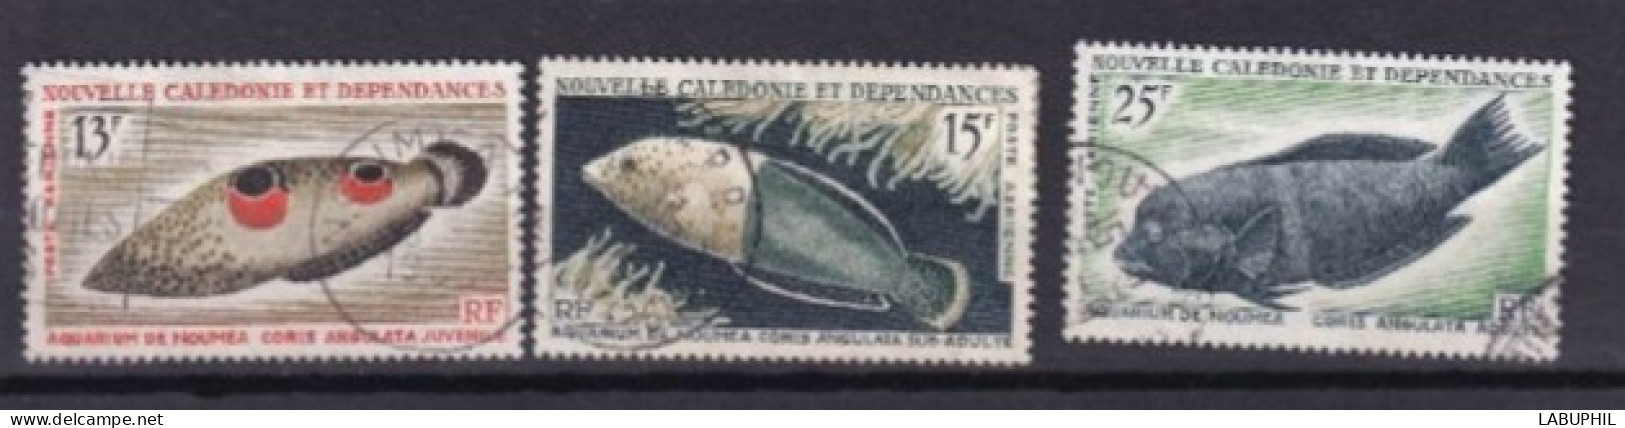 NOUVELLE CALEDONIE Dispersion D'une Collection Oblitéré Used  1965 Faune Poissons - Used Stamps